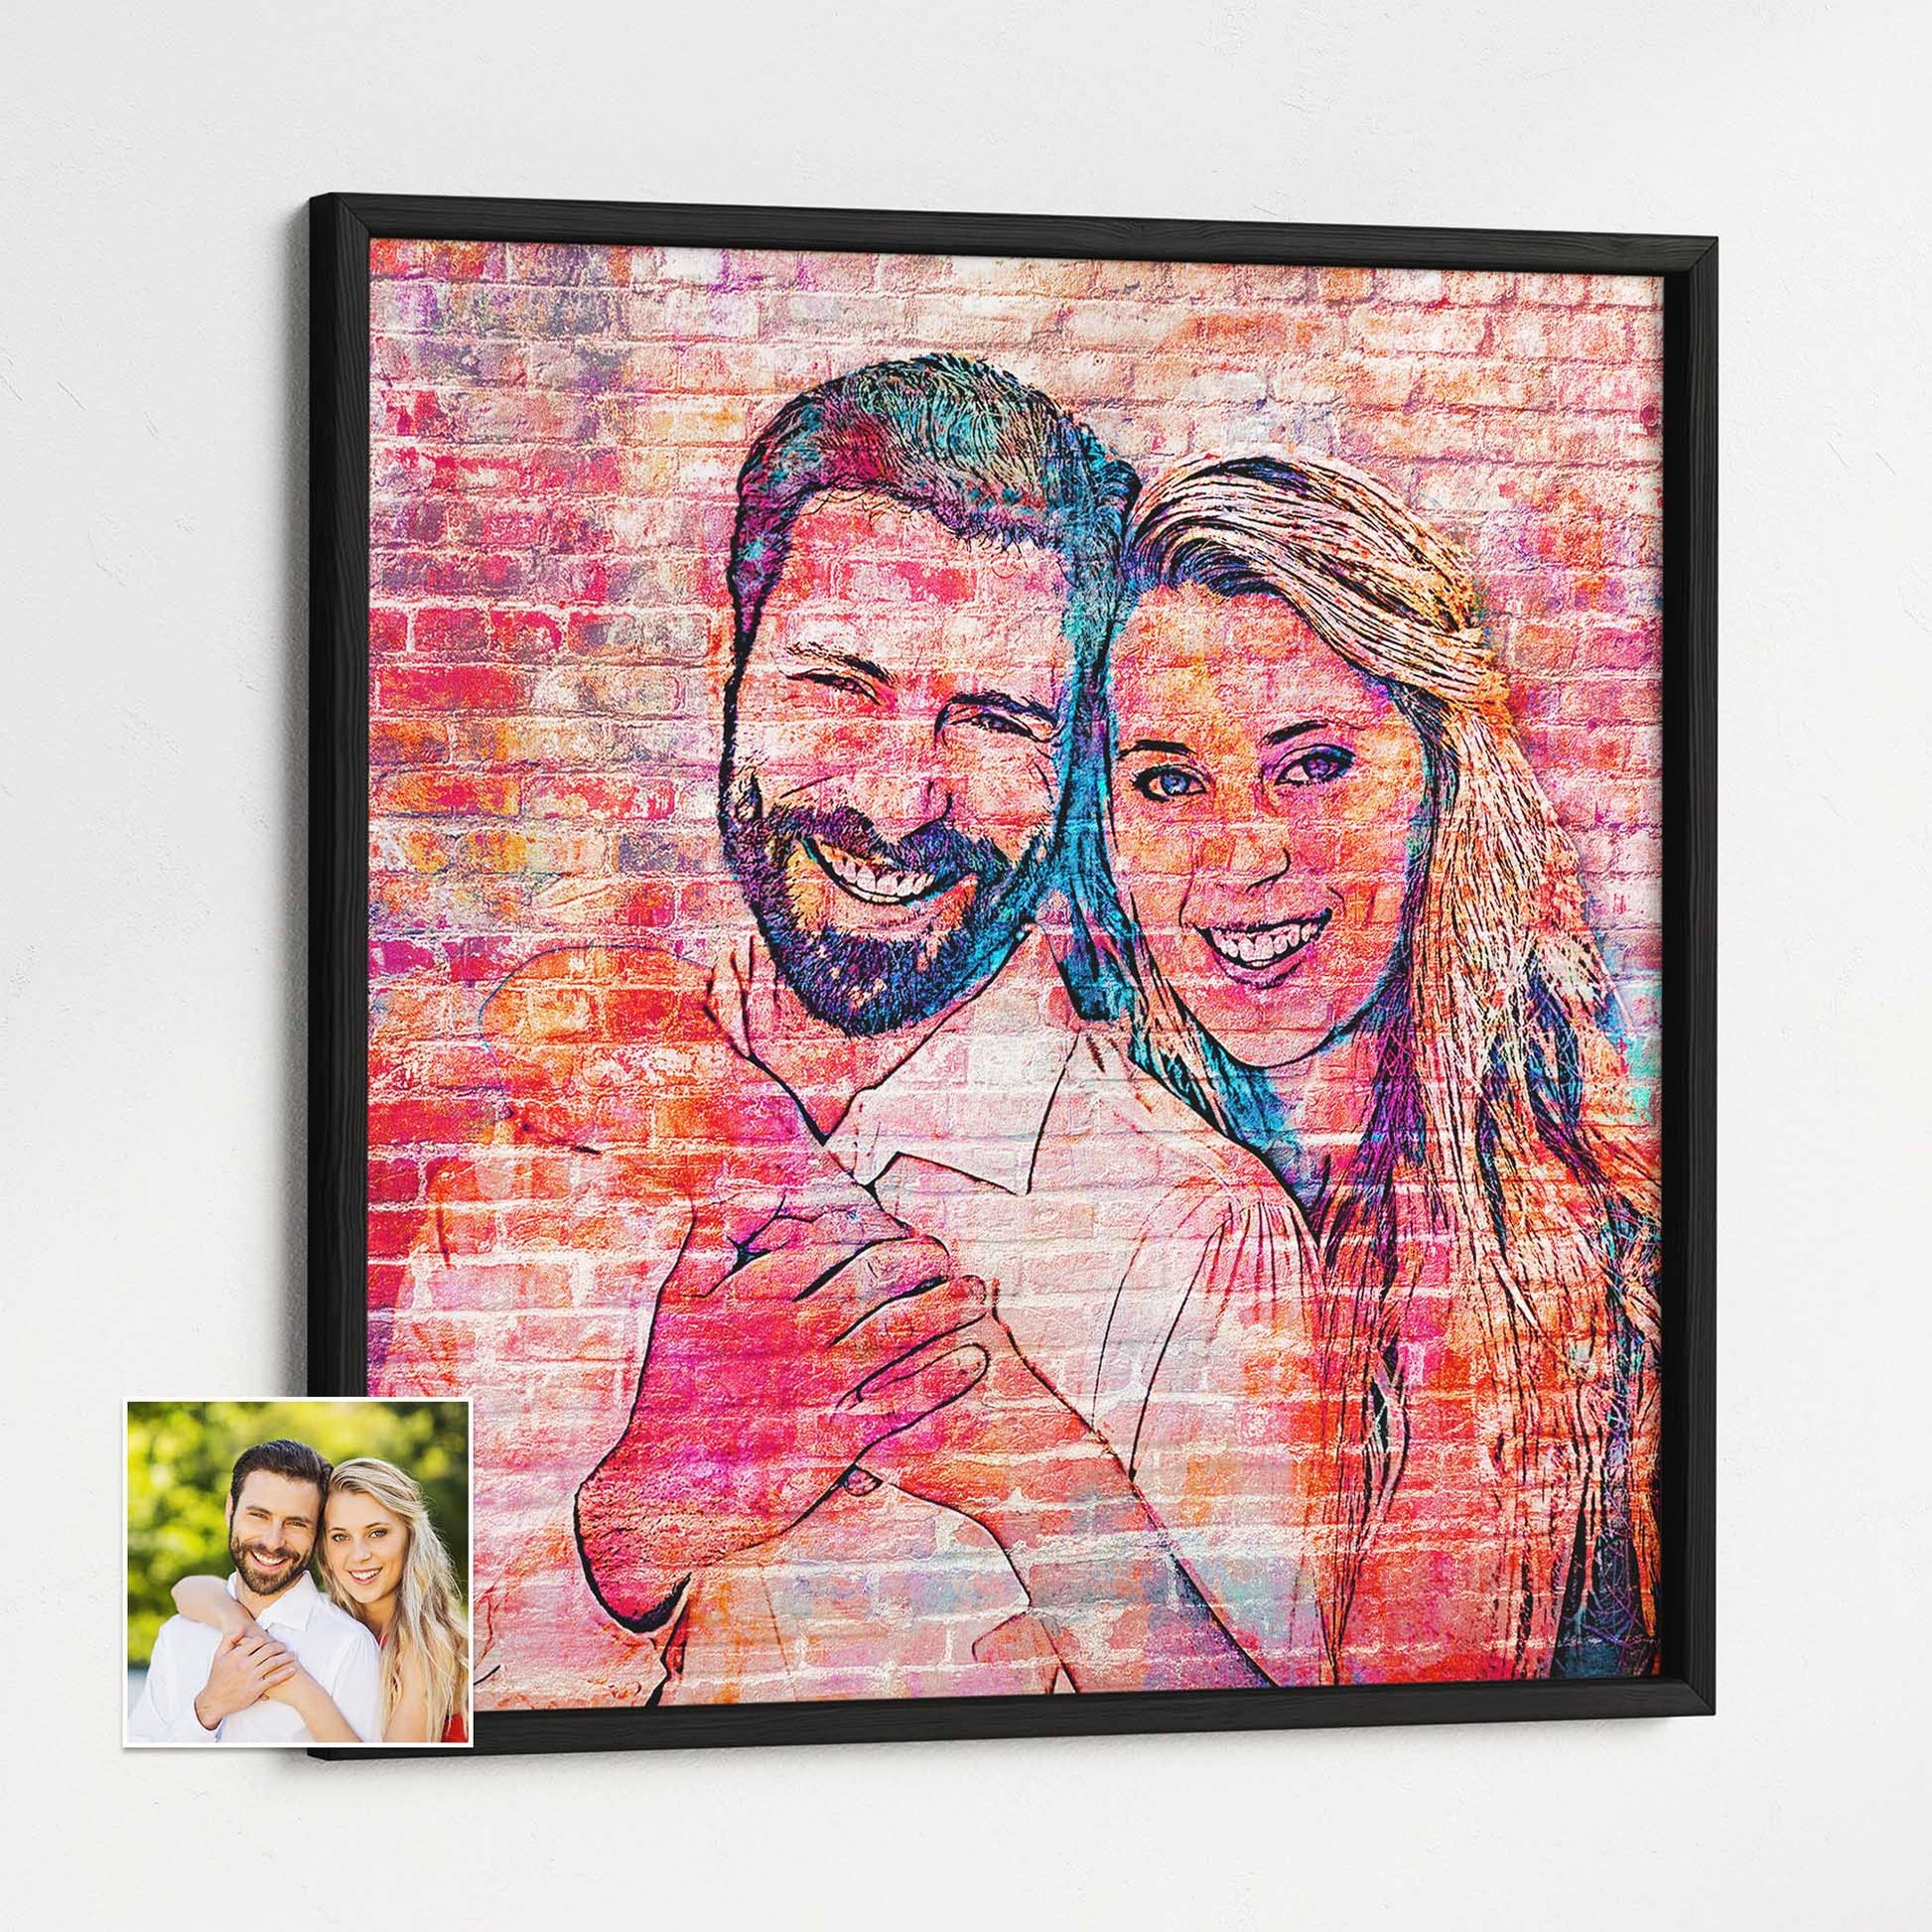 Unleash your creativity with our Personalised Brick Graffiti Street Art Framed Print. This imaginative artwork combines urban elements with a unique twist, creating a visually stunning piece that will transform any wall